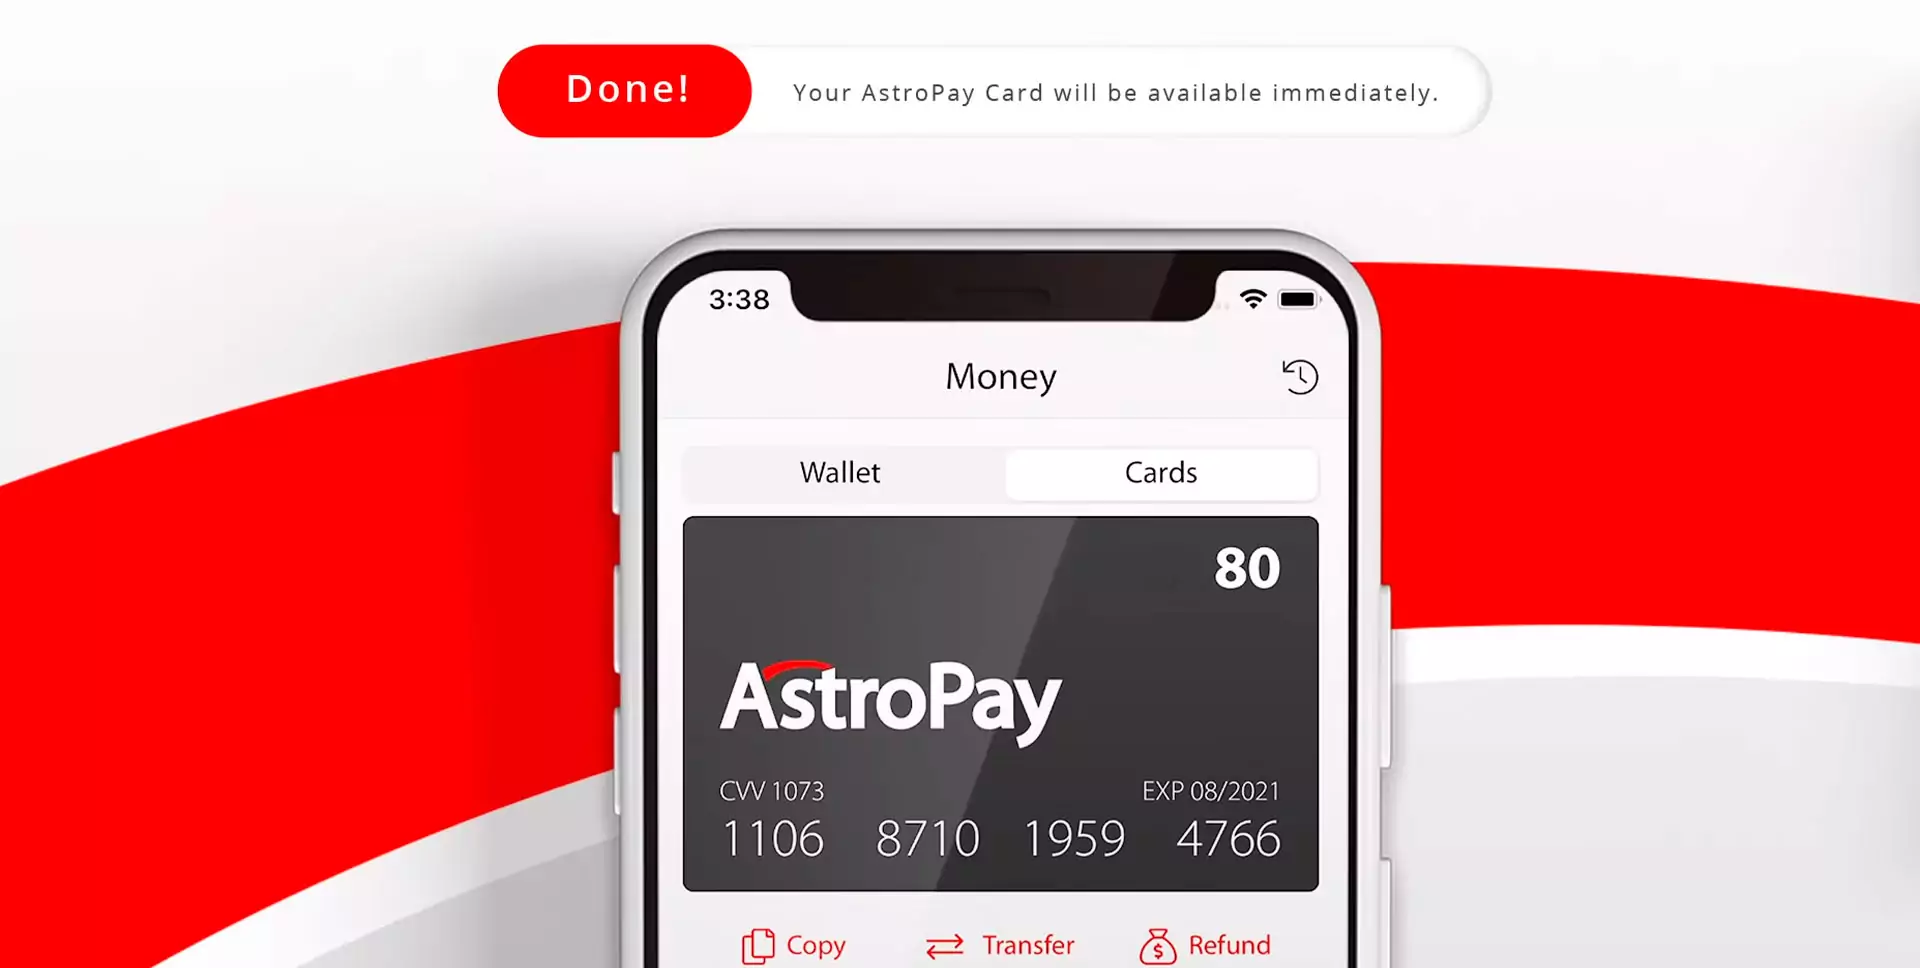 Now you have your Astropay card and can make deposits on cricket betting sites.